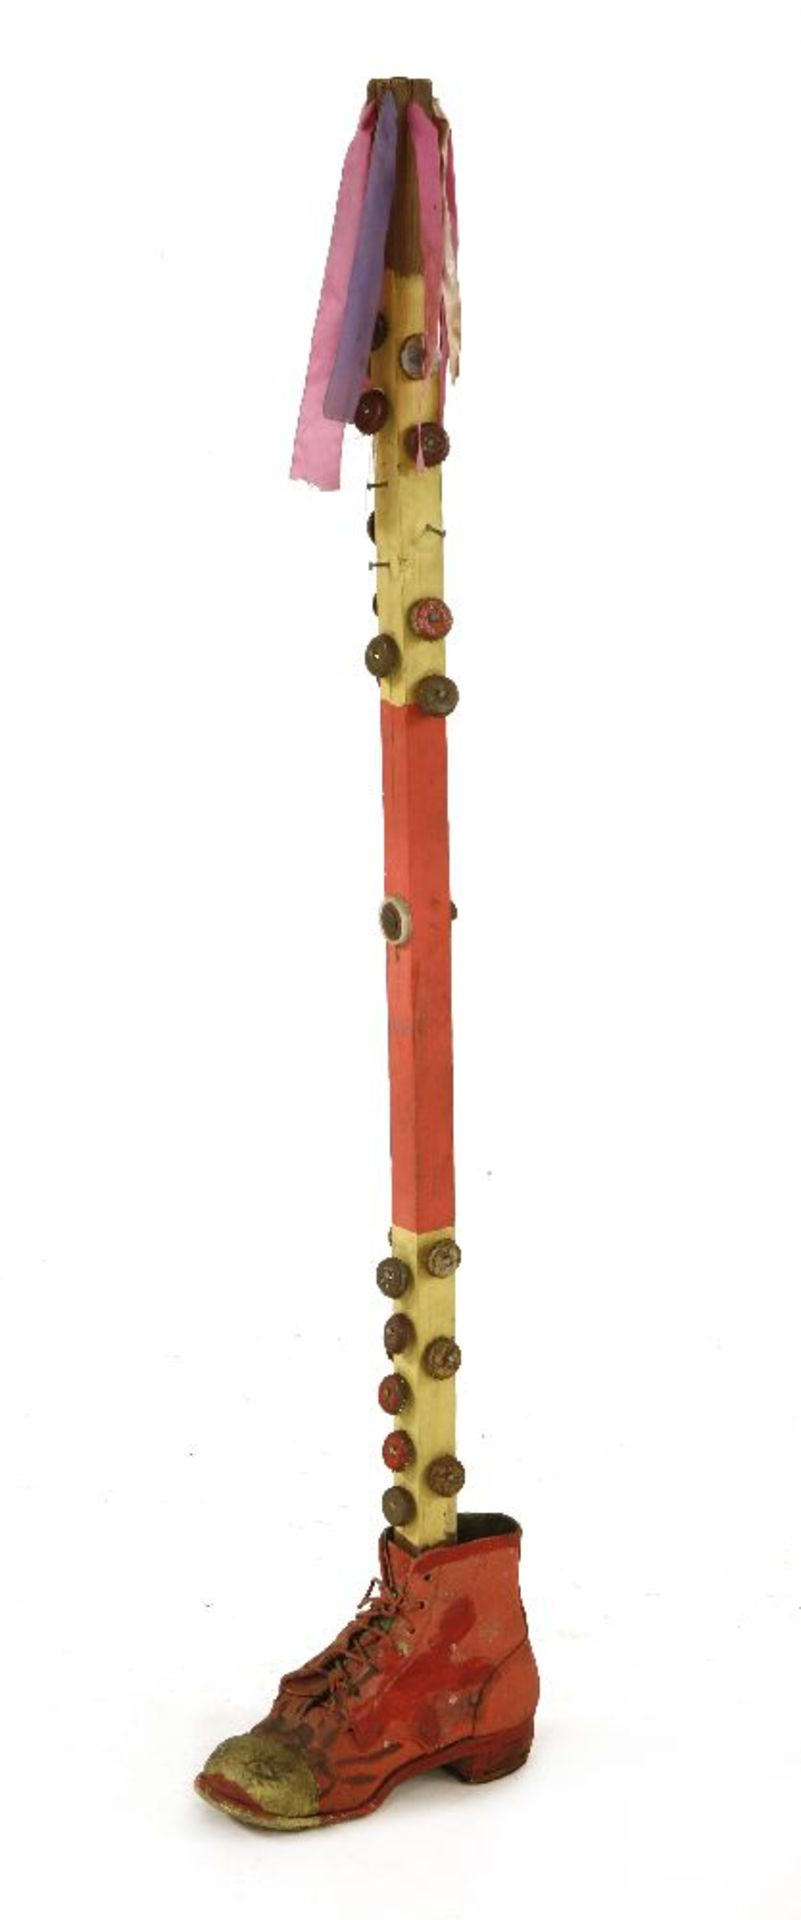 A MORRIS DANCER'S STICK, painted finish with applied bottle caps and red boot to the base, 118cm